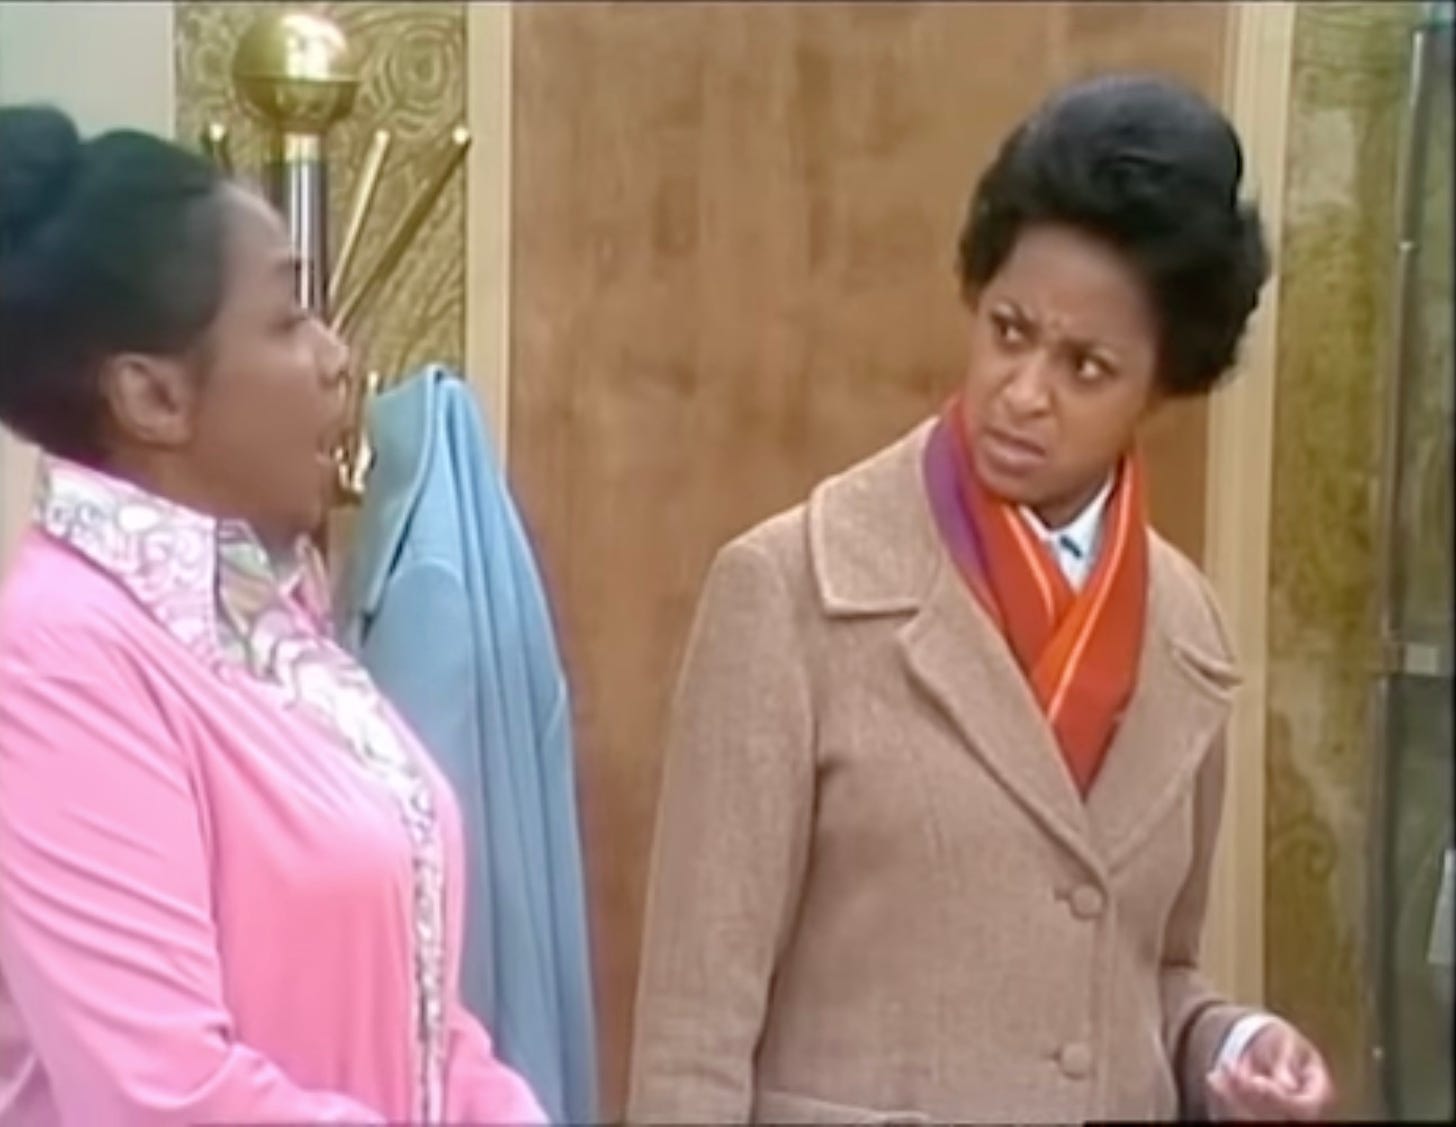 Louise (Isabel Sanford) and Florence (Marla Gibbs) interact in the pilot episode of the Jeffersons. Two Black women, one in a pink sweater and the other in a tan coat look at each other